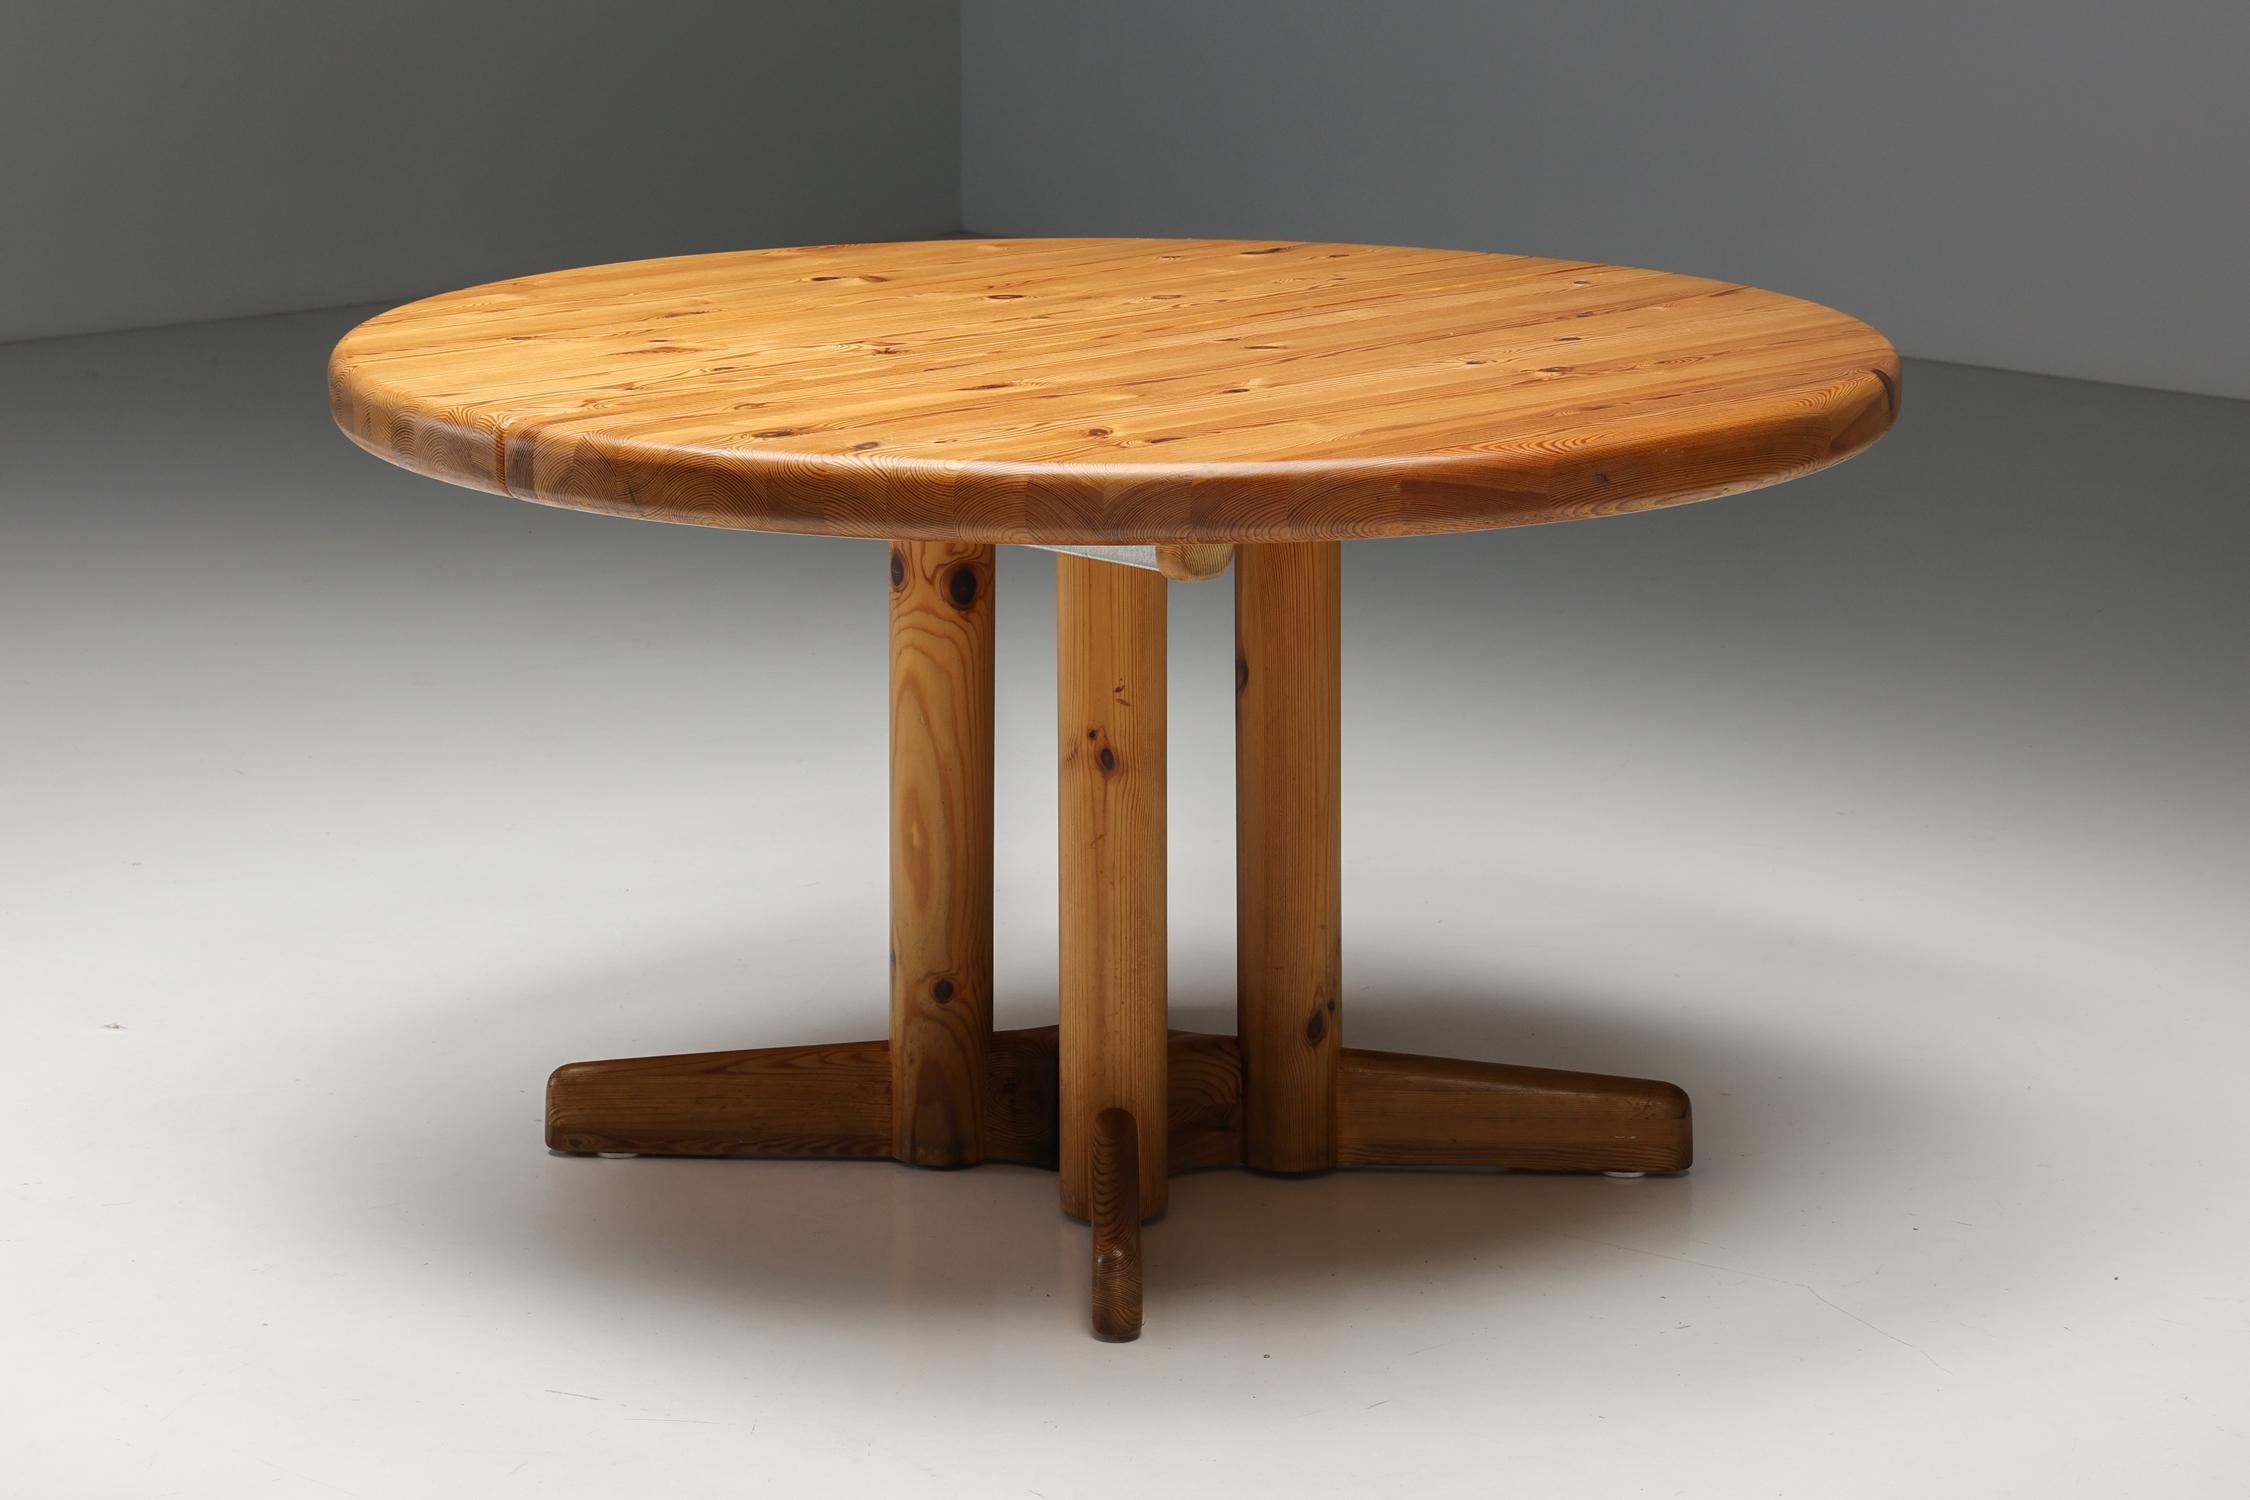 Rainer Daumiller Extendable Dining Table in Solid Pine, Danish Design, 1970's For Sale 1